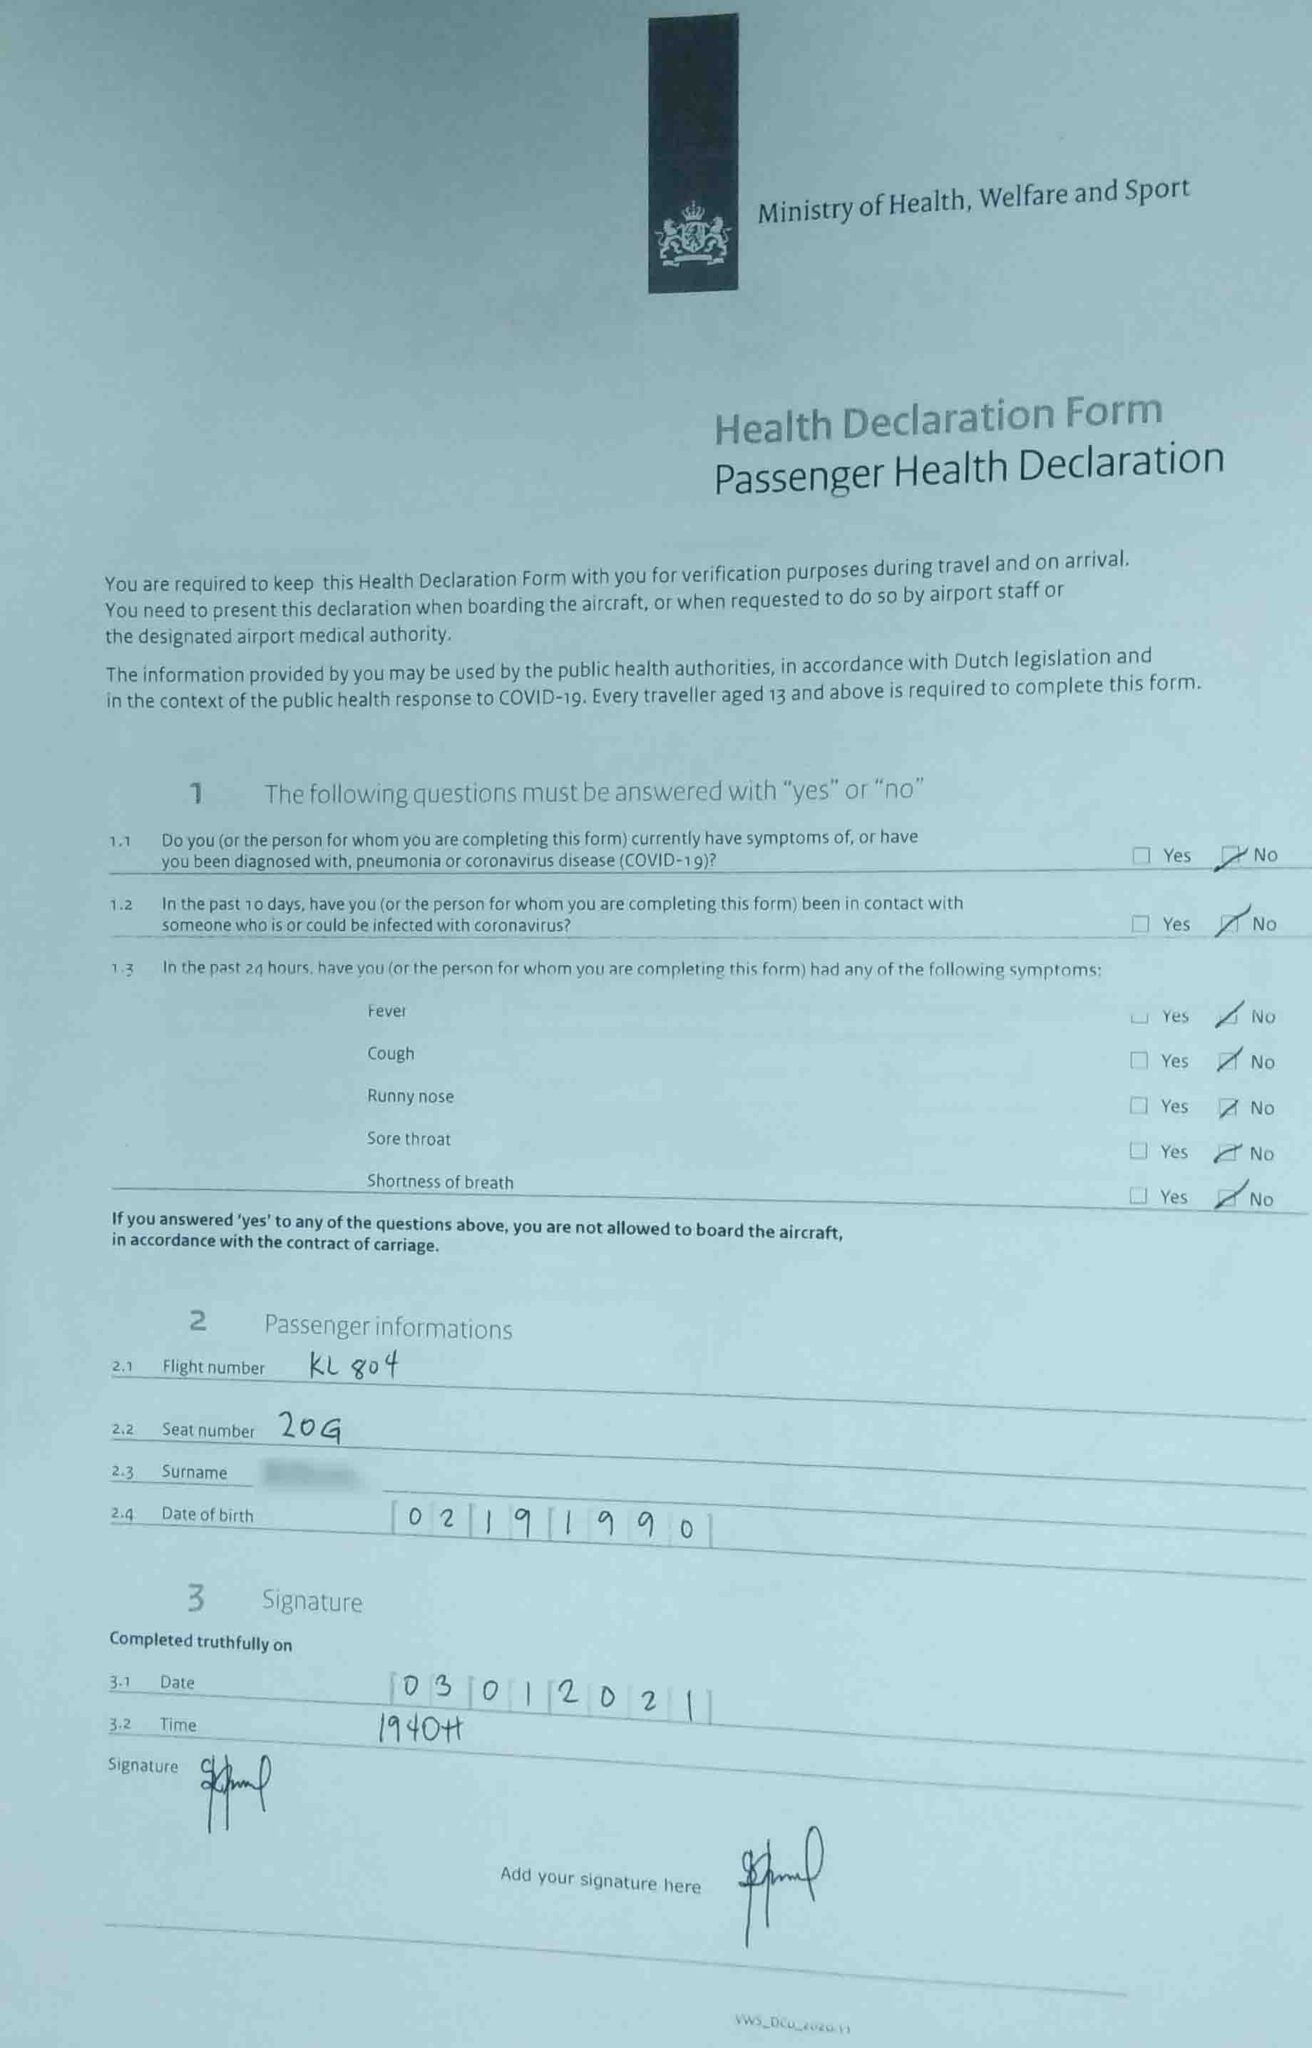 Passenger Health Declaration Form Amsterdam with the bearers personal information in handwritten format.